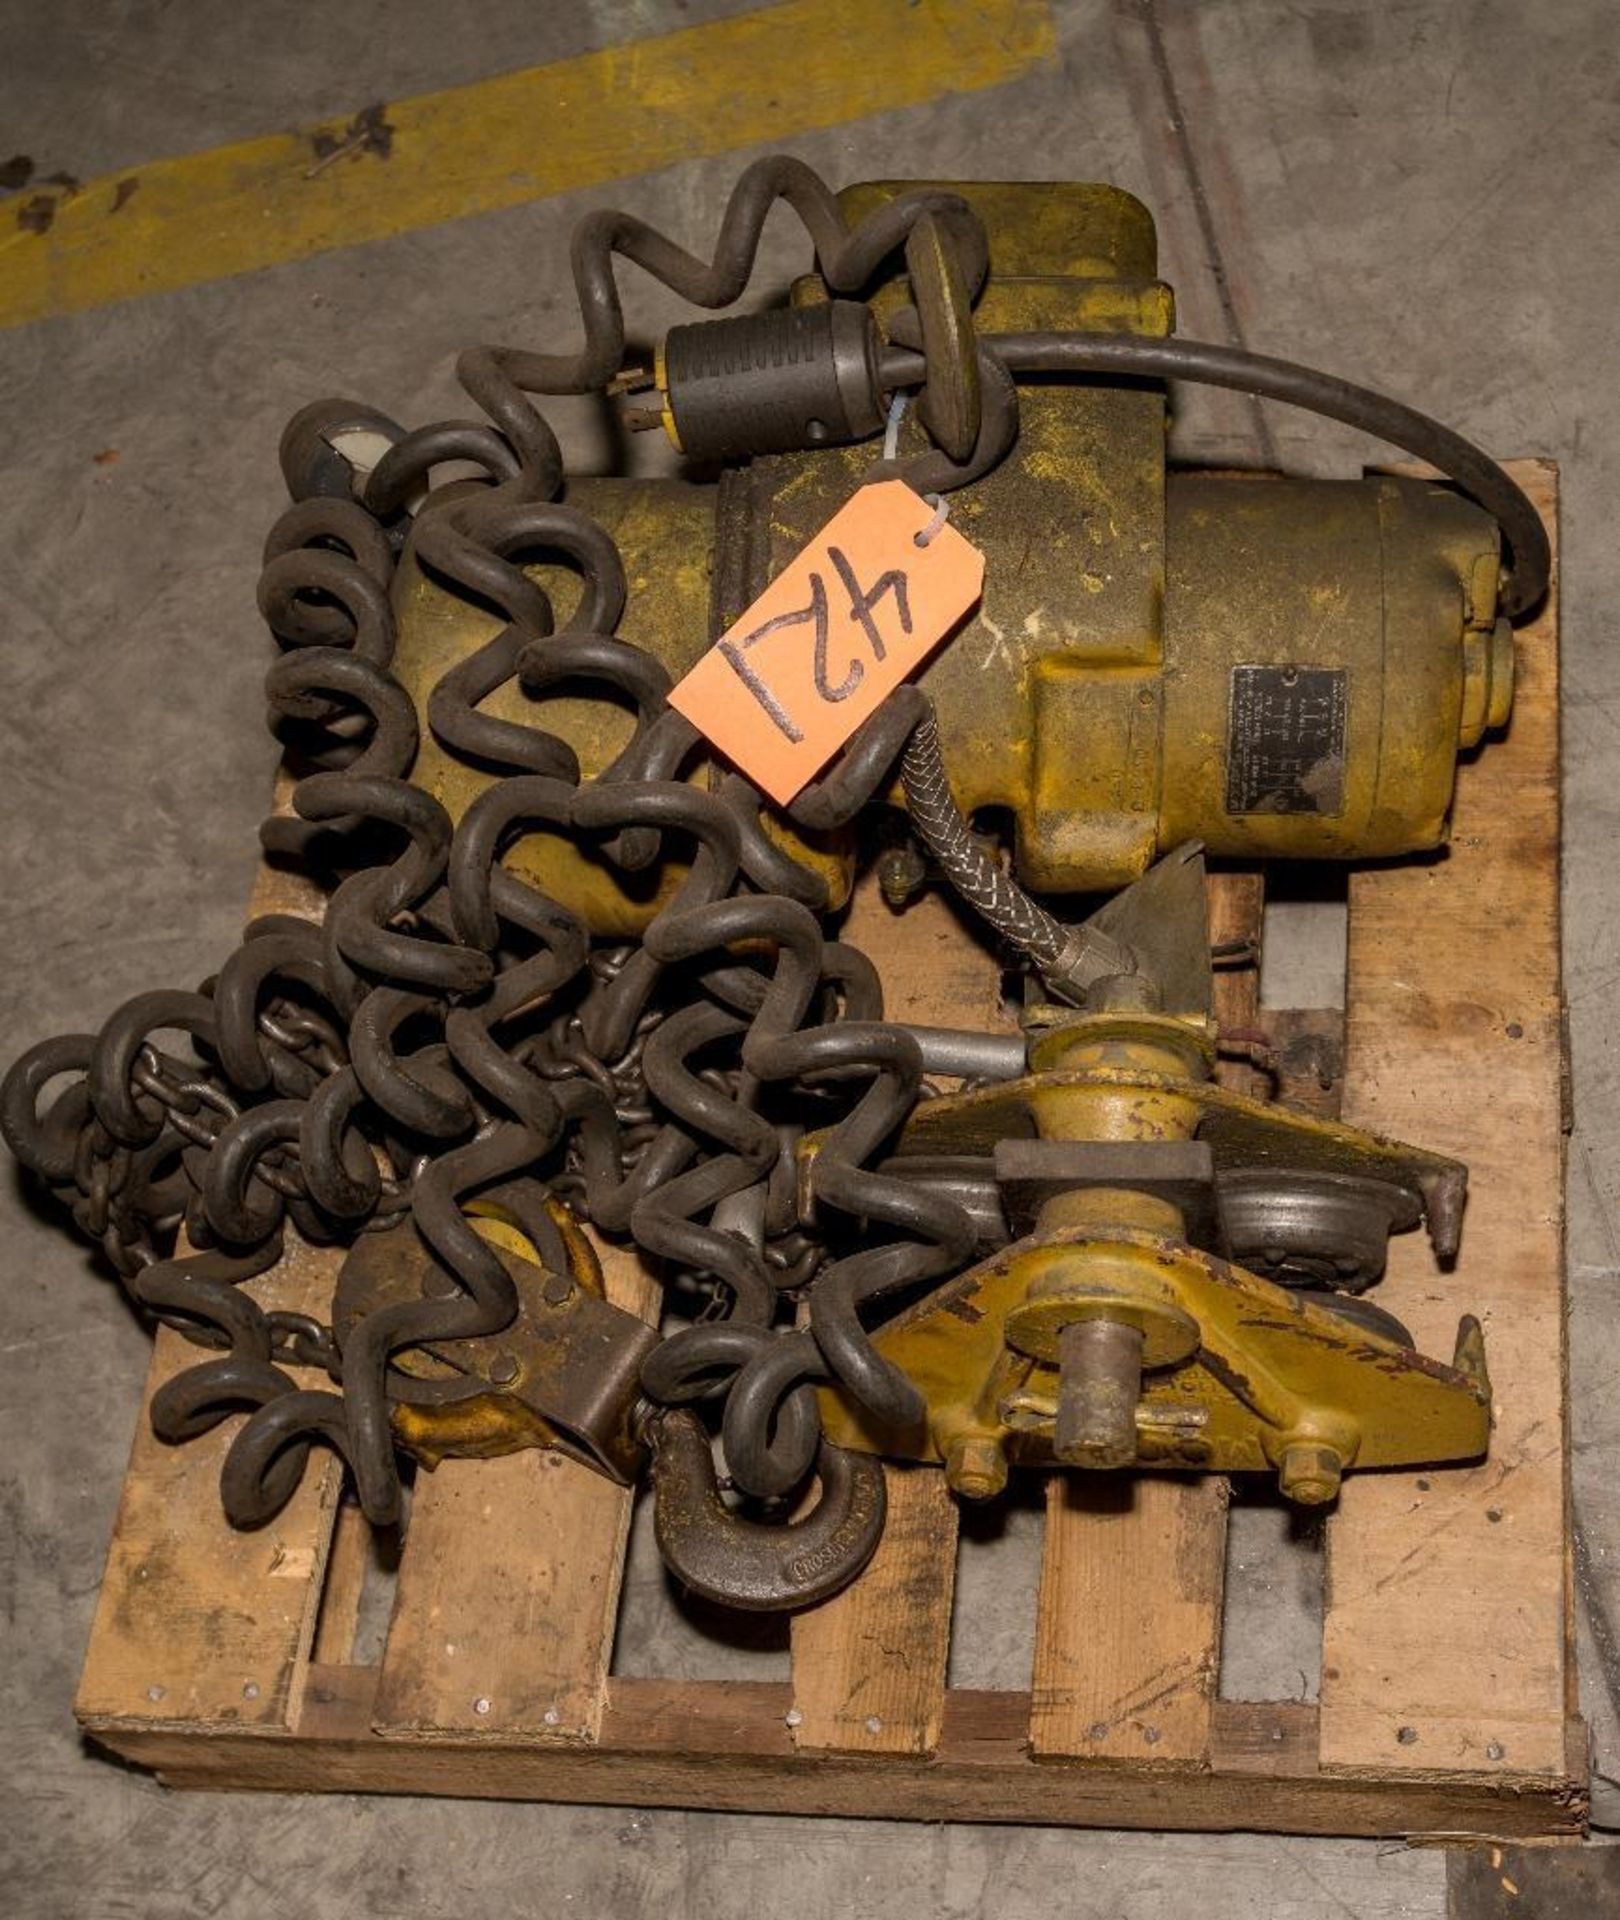 Robins & Myers 1 ton hoist, 220v 3ph, Type JC-1, s/n 10050PT7 Condition Unknown, LOCATED-United Tool